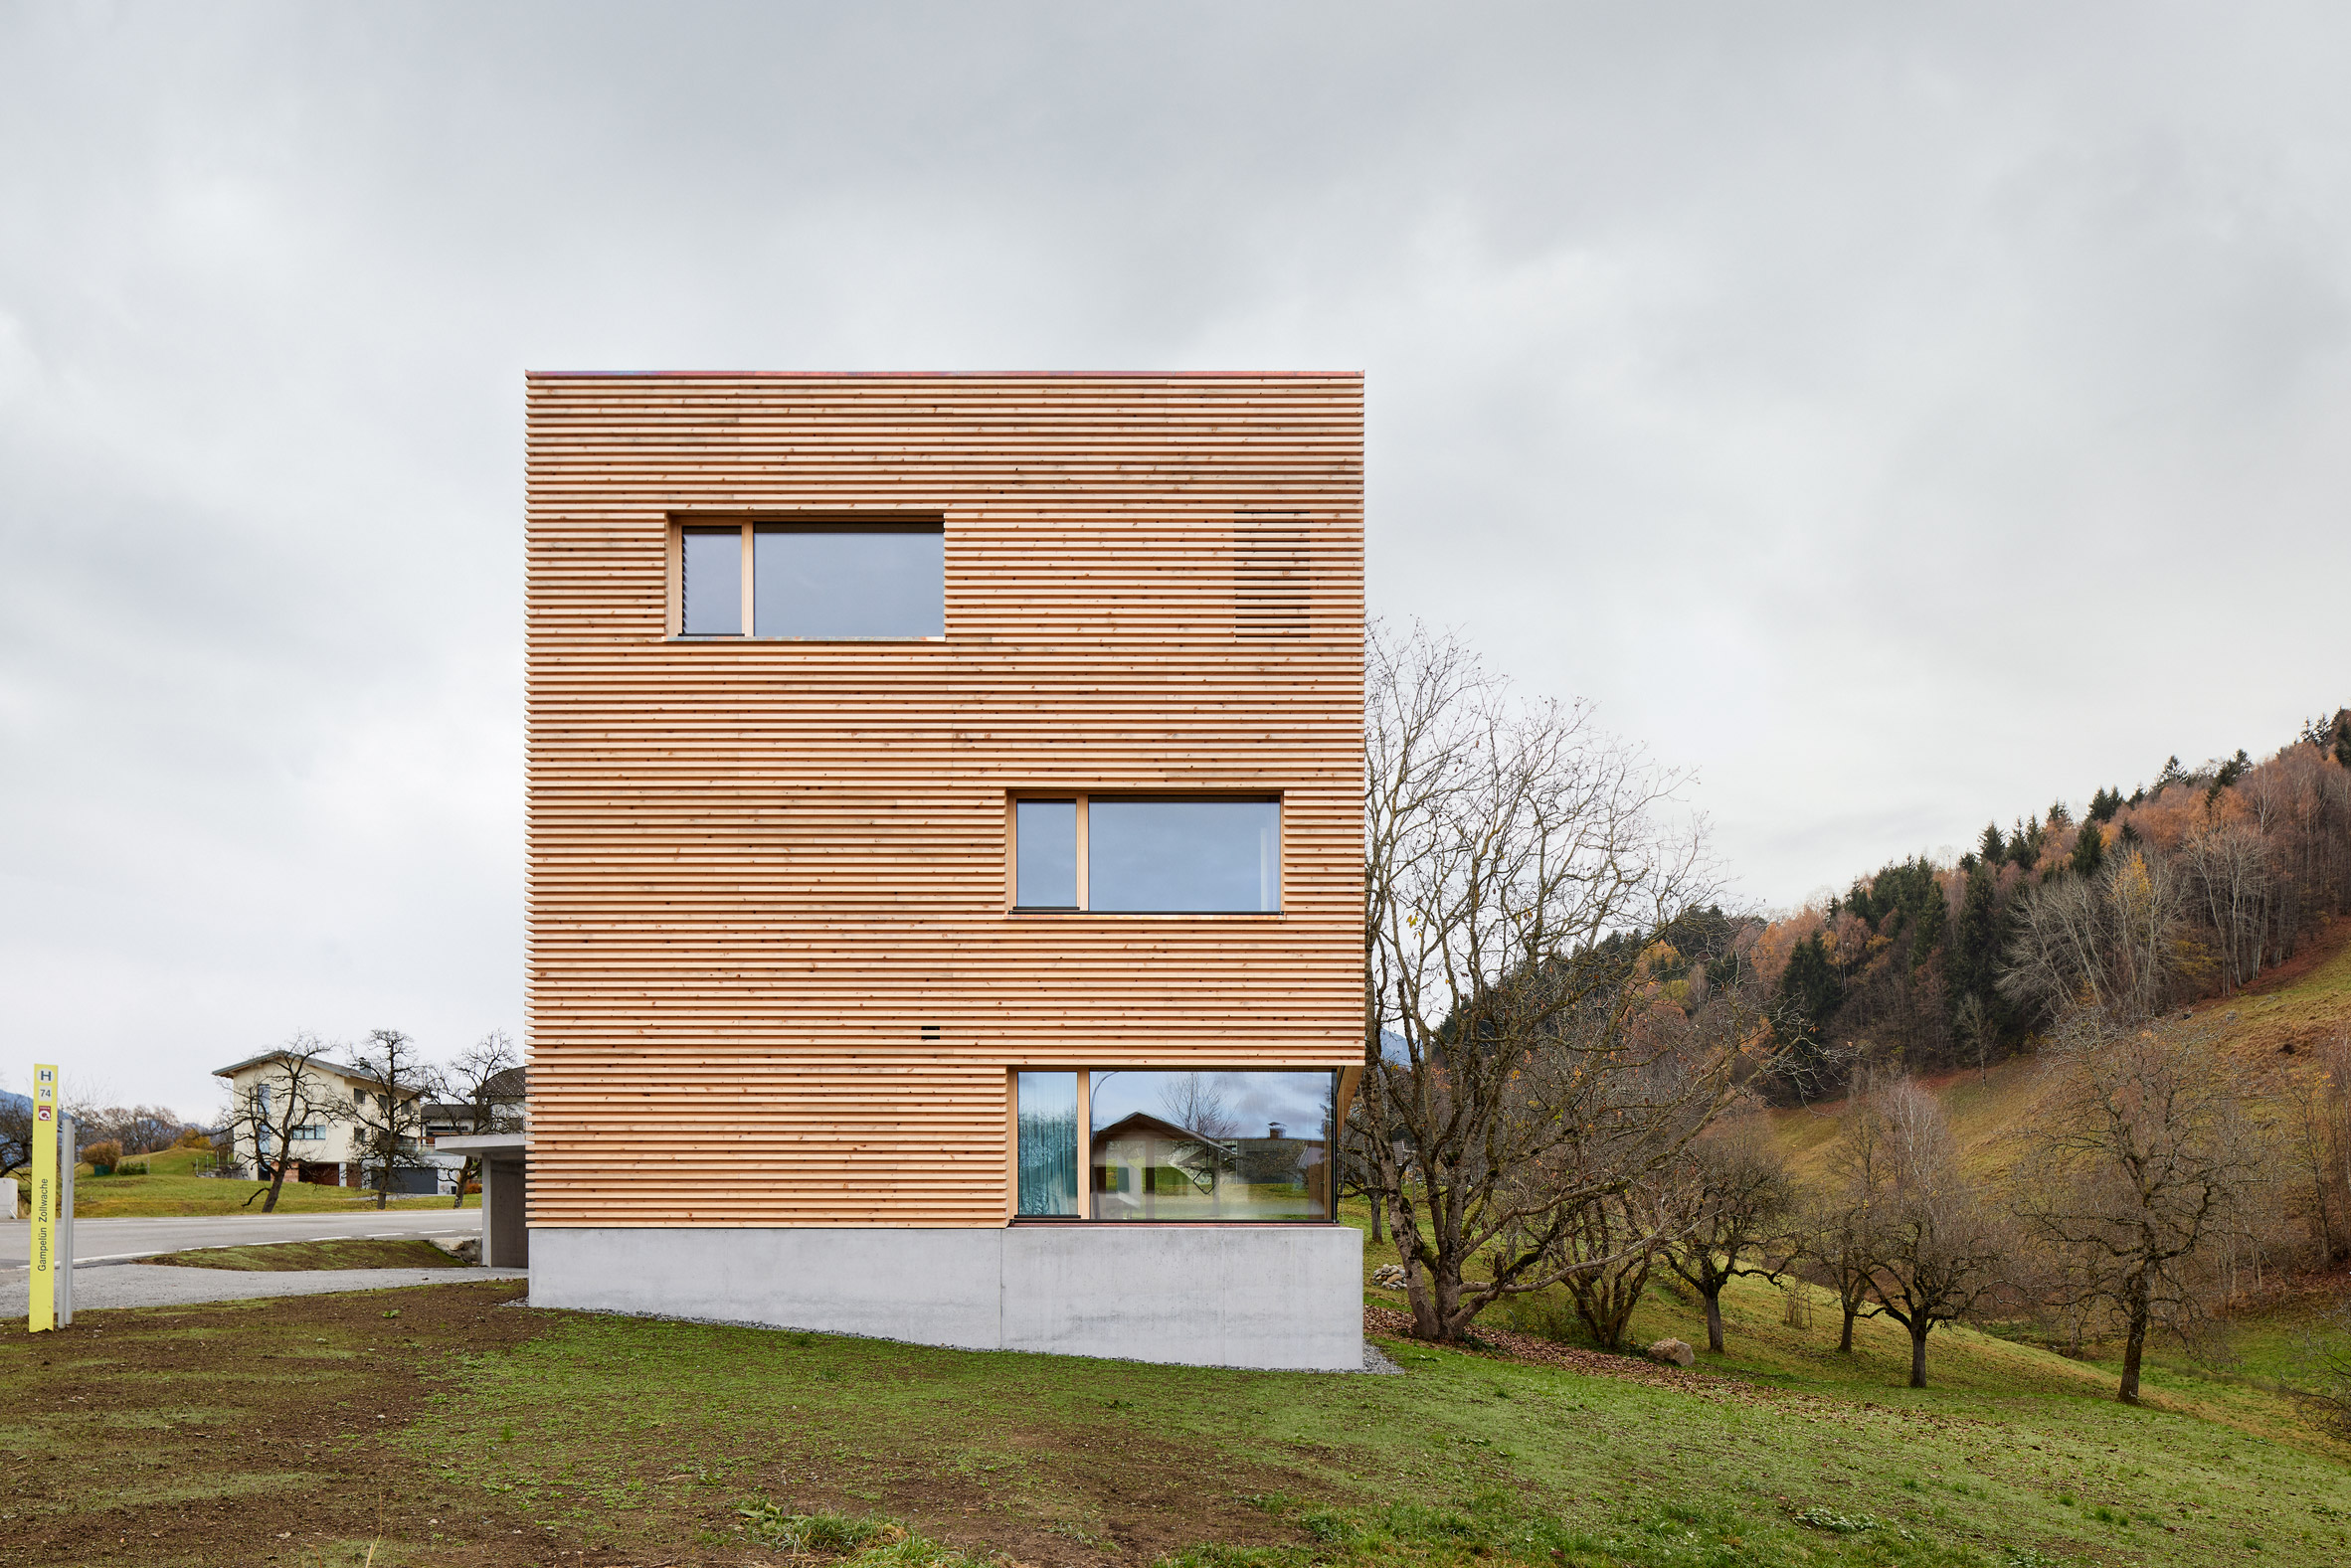 A square timber-clad house with a concrete base